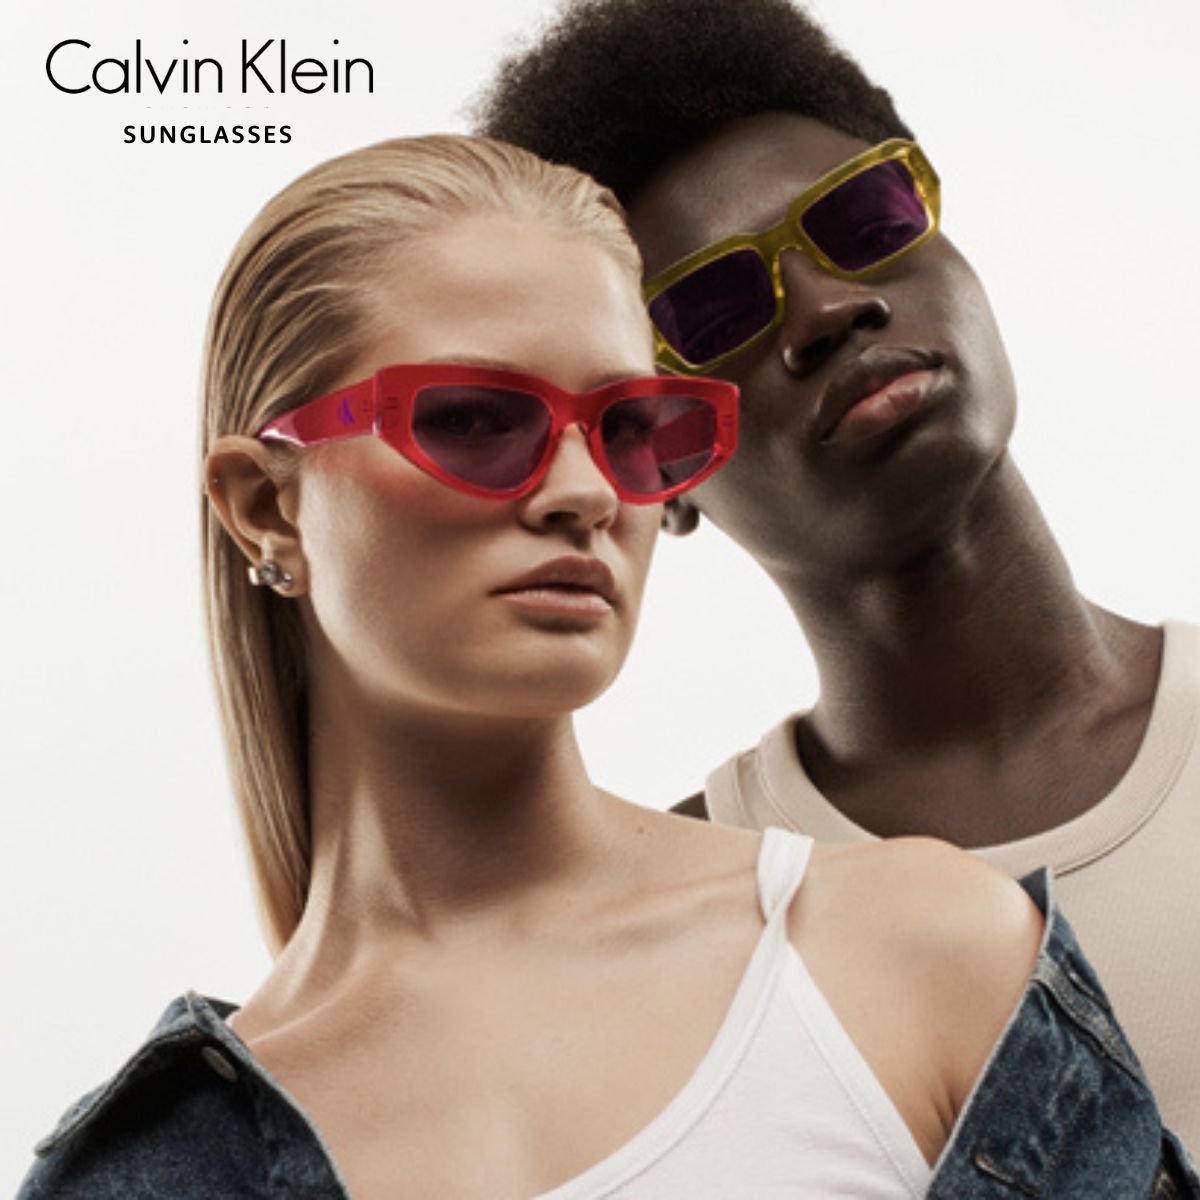 "Calvin Klein sunglasses for men and women featured on Optorium, highlighting stylish, top-brand shades and fashionable goggles."